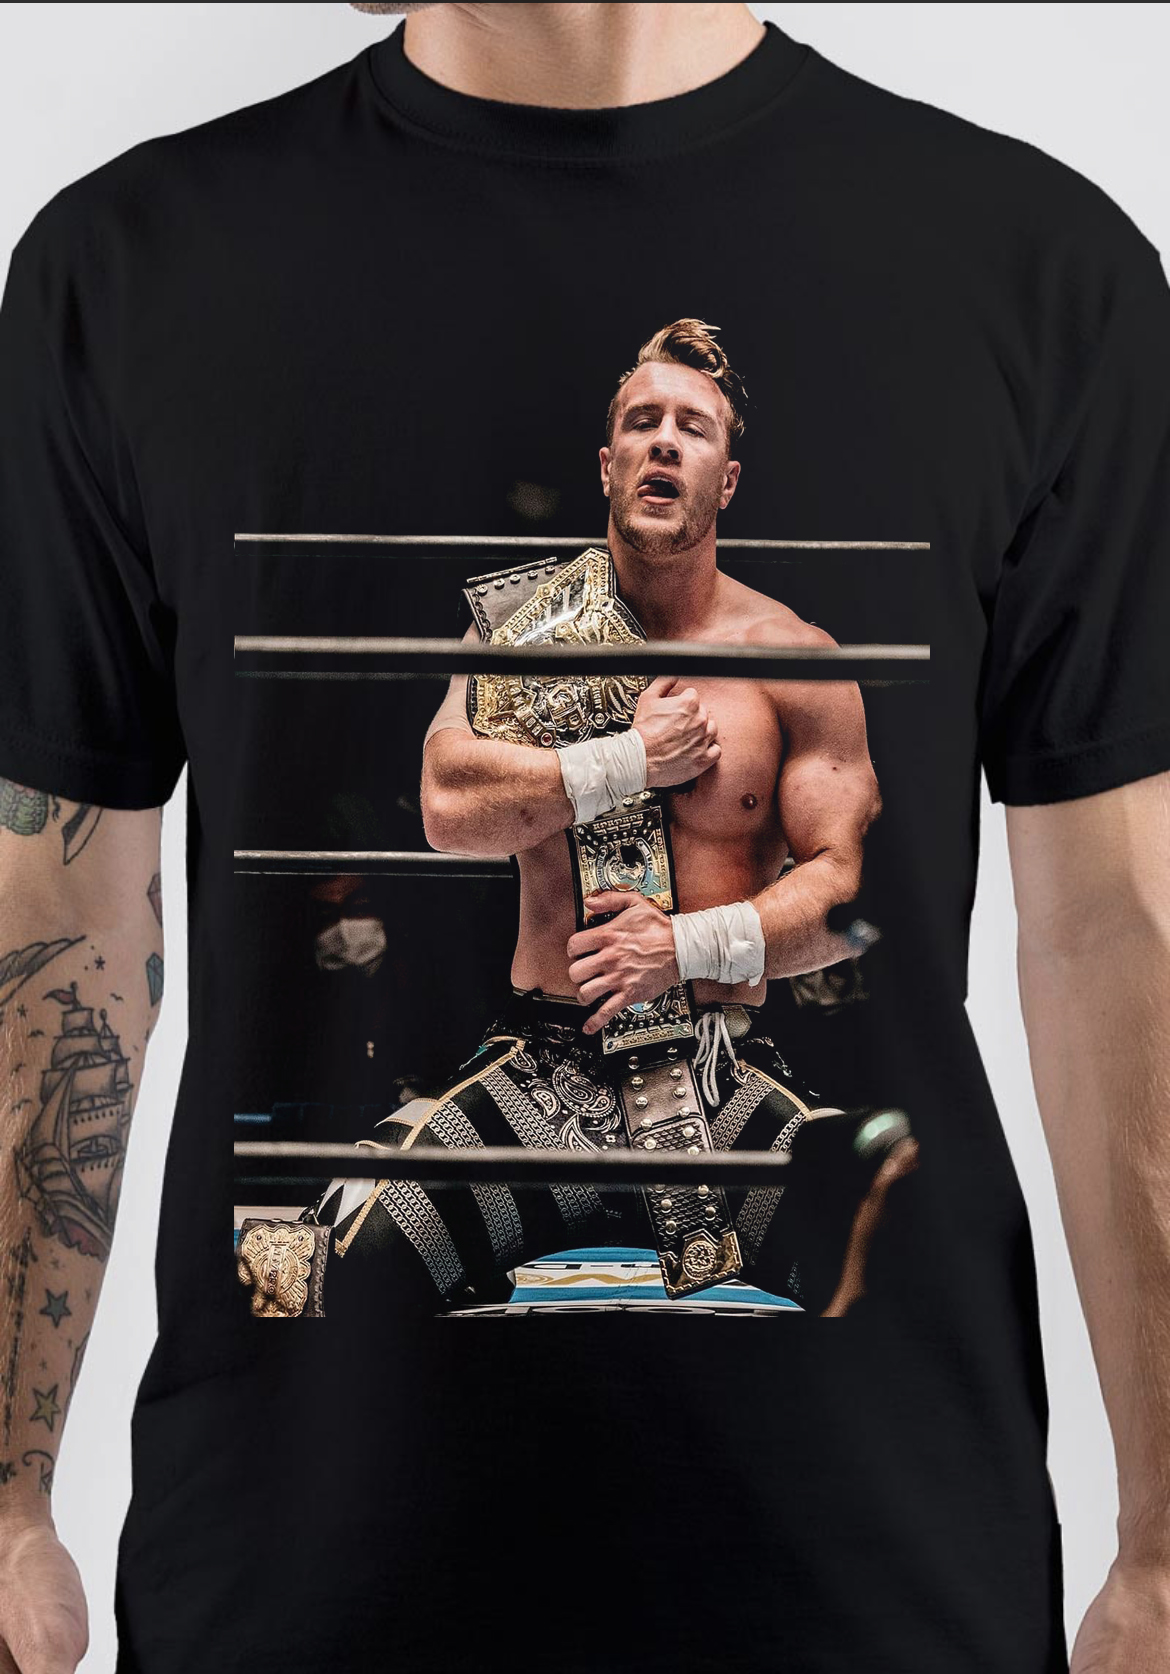 Will Ospreay T-Shirt And Merchandise